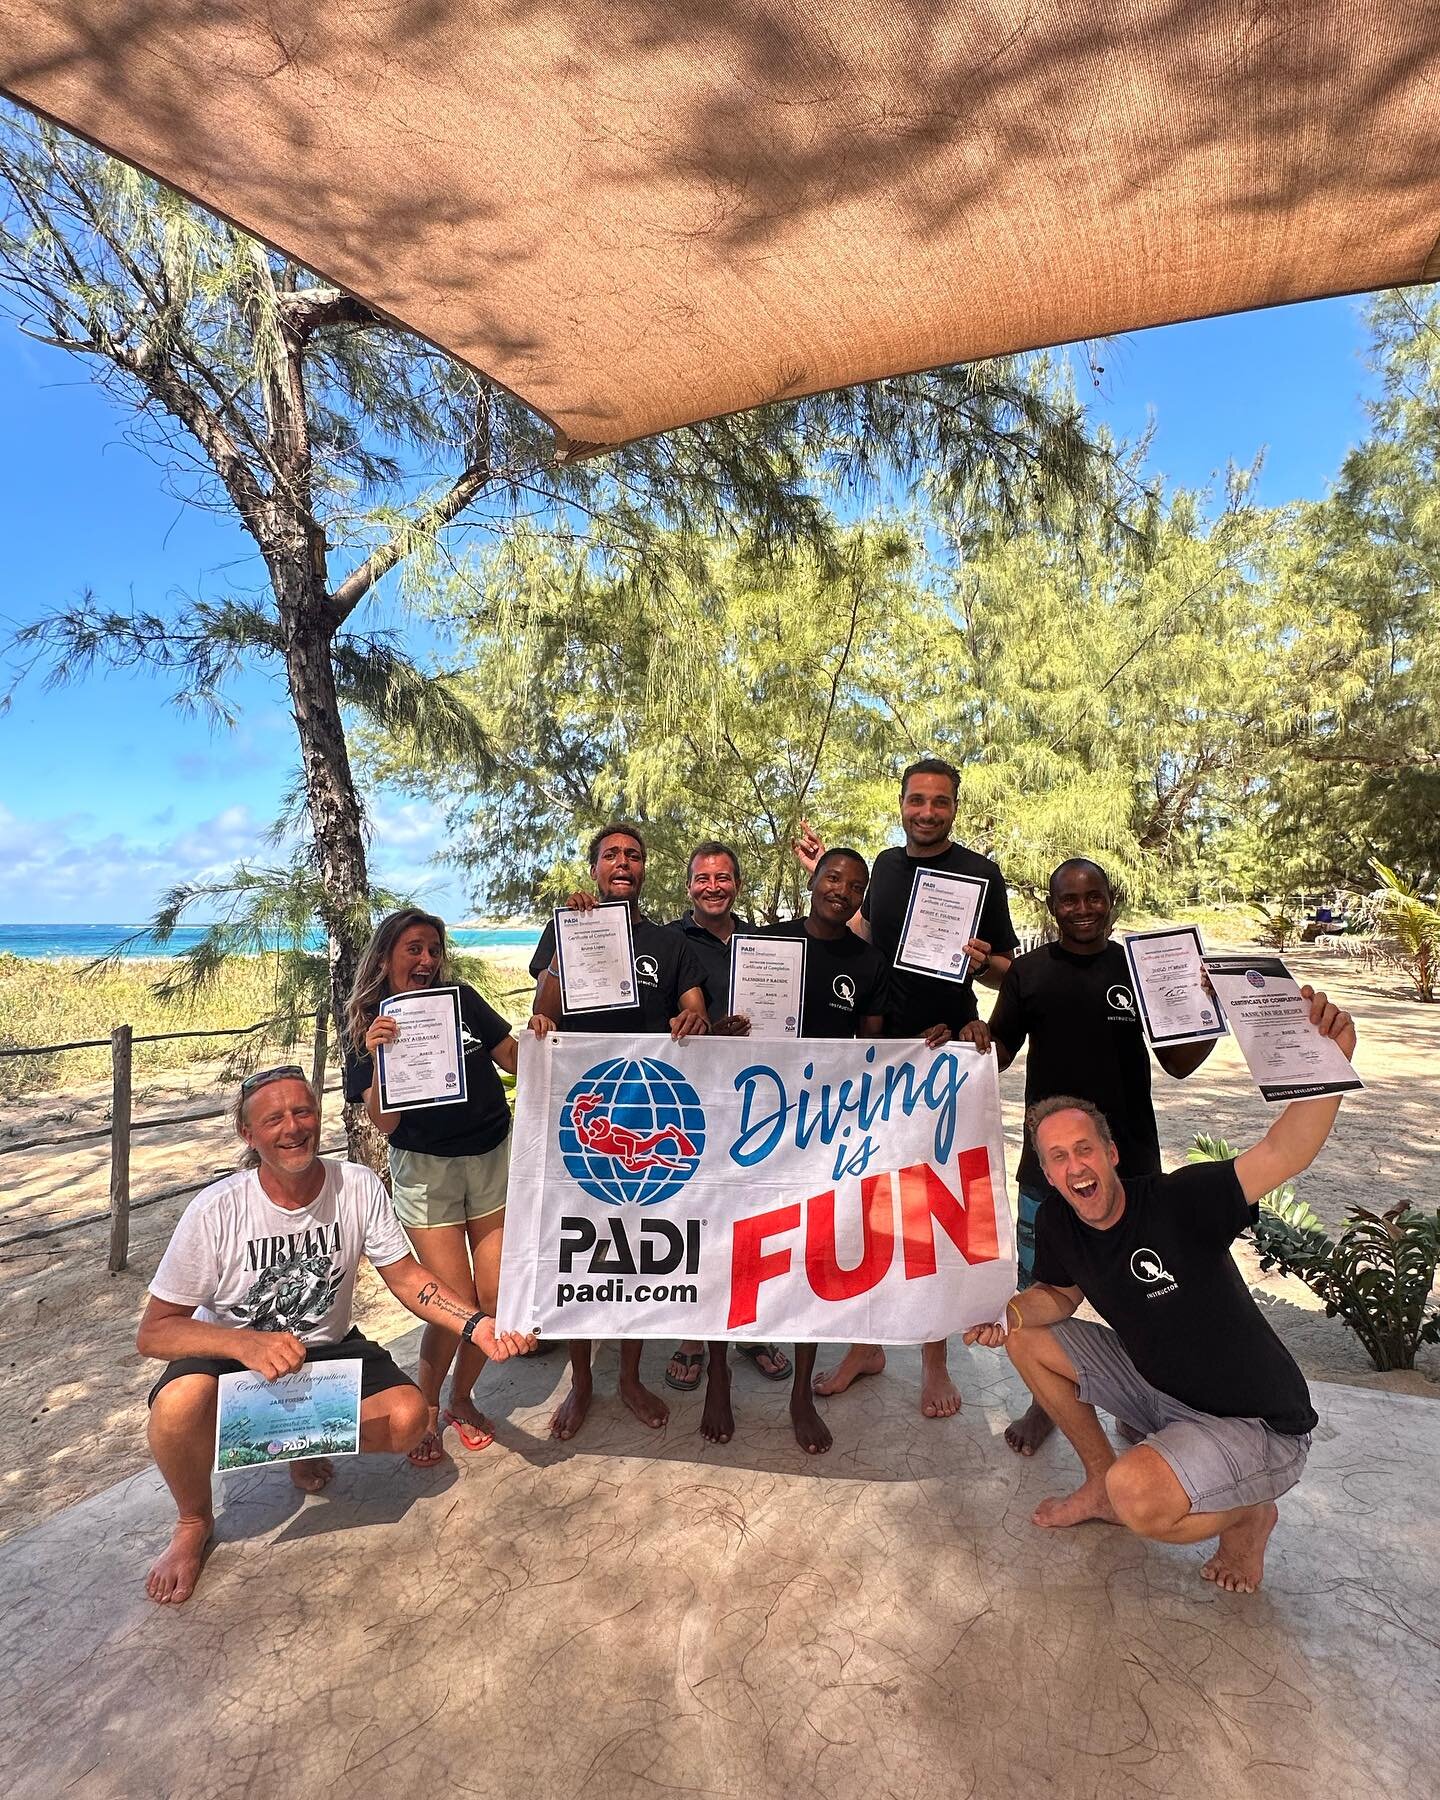 Congratulations to our new PADI instructors!!!

If being an instructor is also your dream, get in touch for more info ℹ️

Our next IDC is in August when the migrating humpback whales are here in high numbers 🐳🐳🐳🐳🐳🐳🐳
.
.
.
.
.
#padiinstructor #